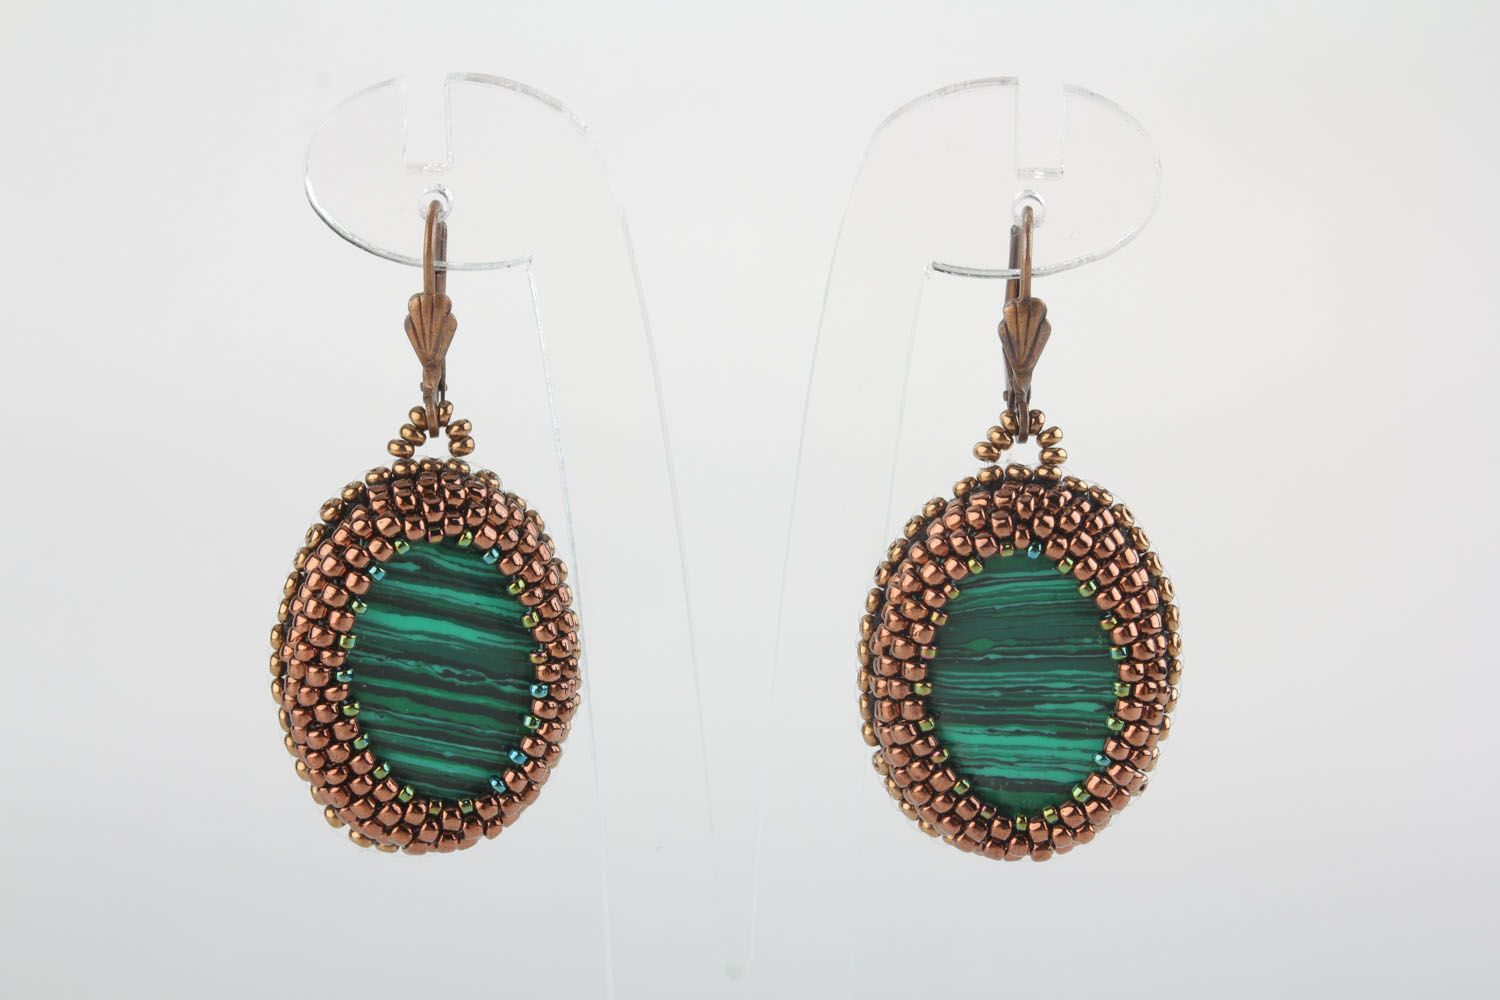 Earrings made of leather and malachite photo 1